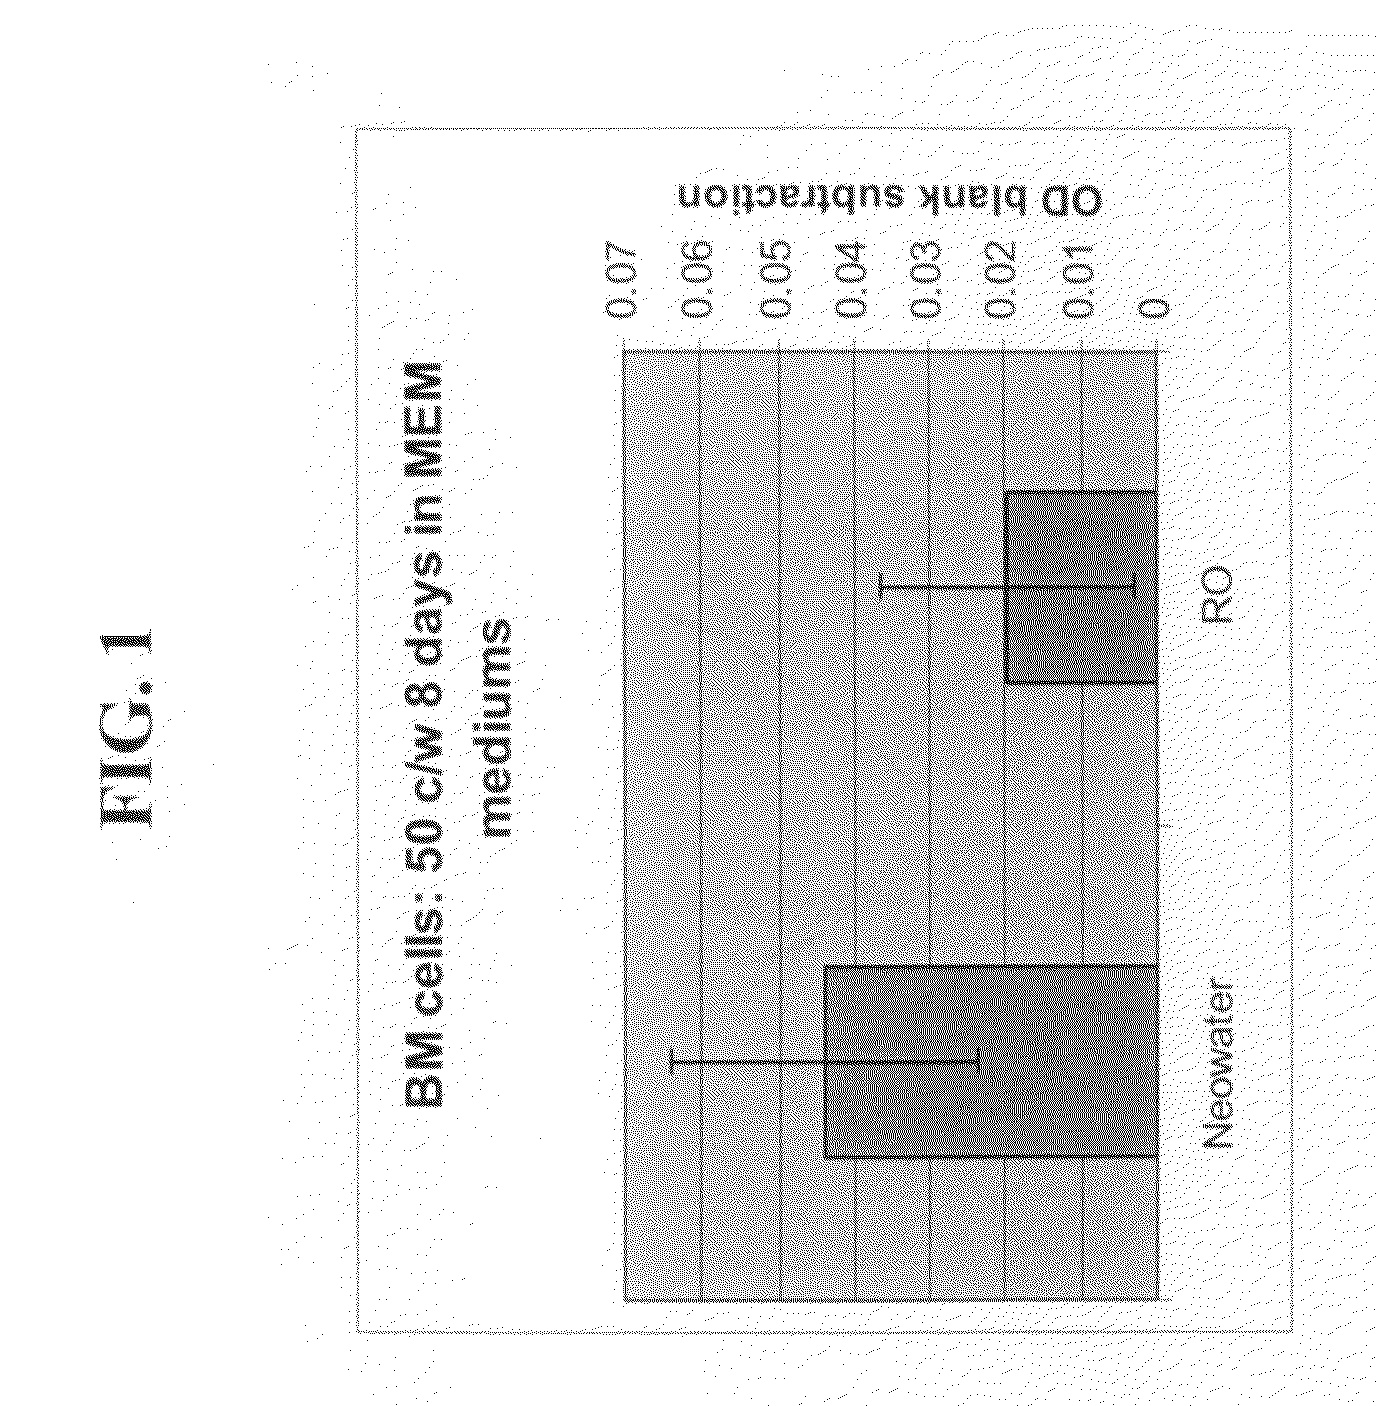 Composition and method for enhancing cell growth and cell fusion